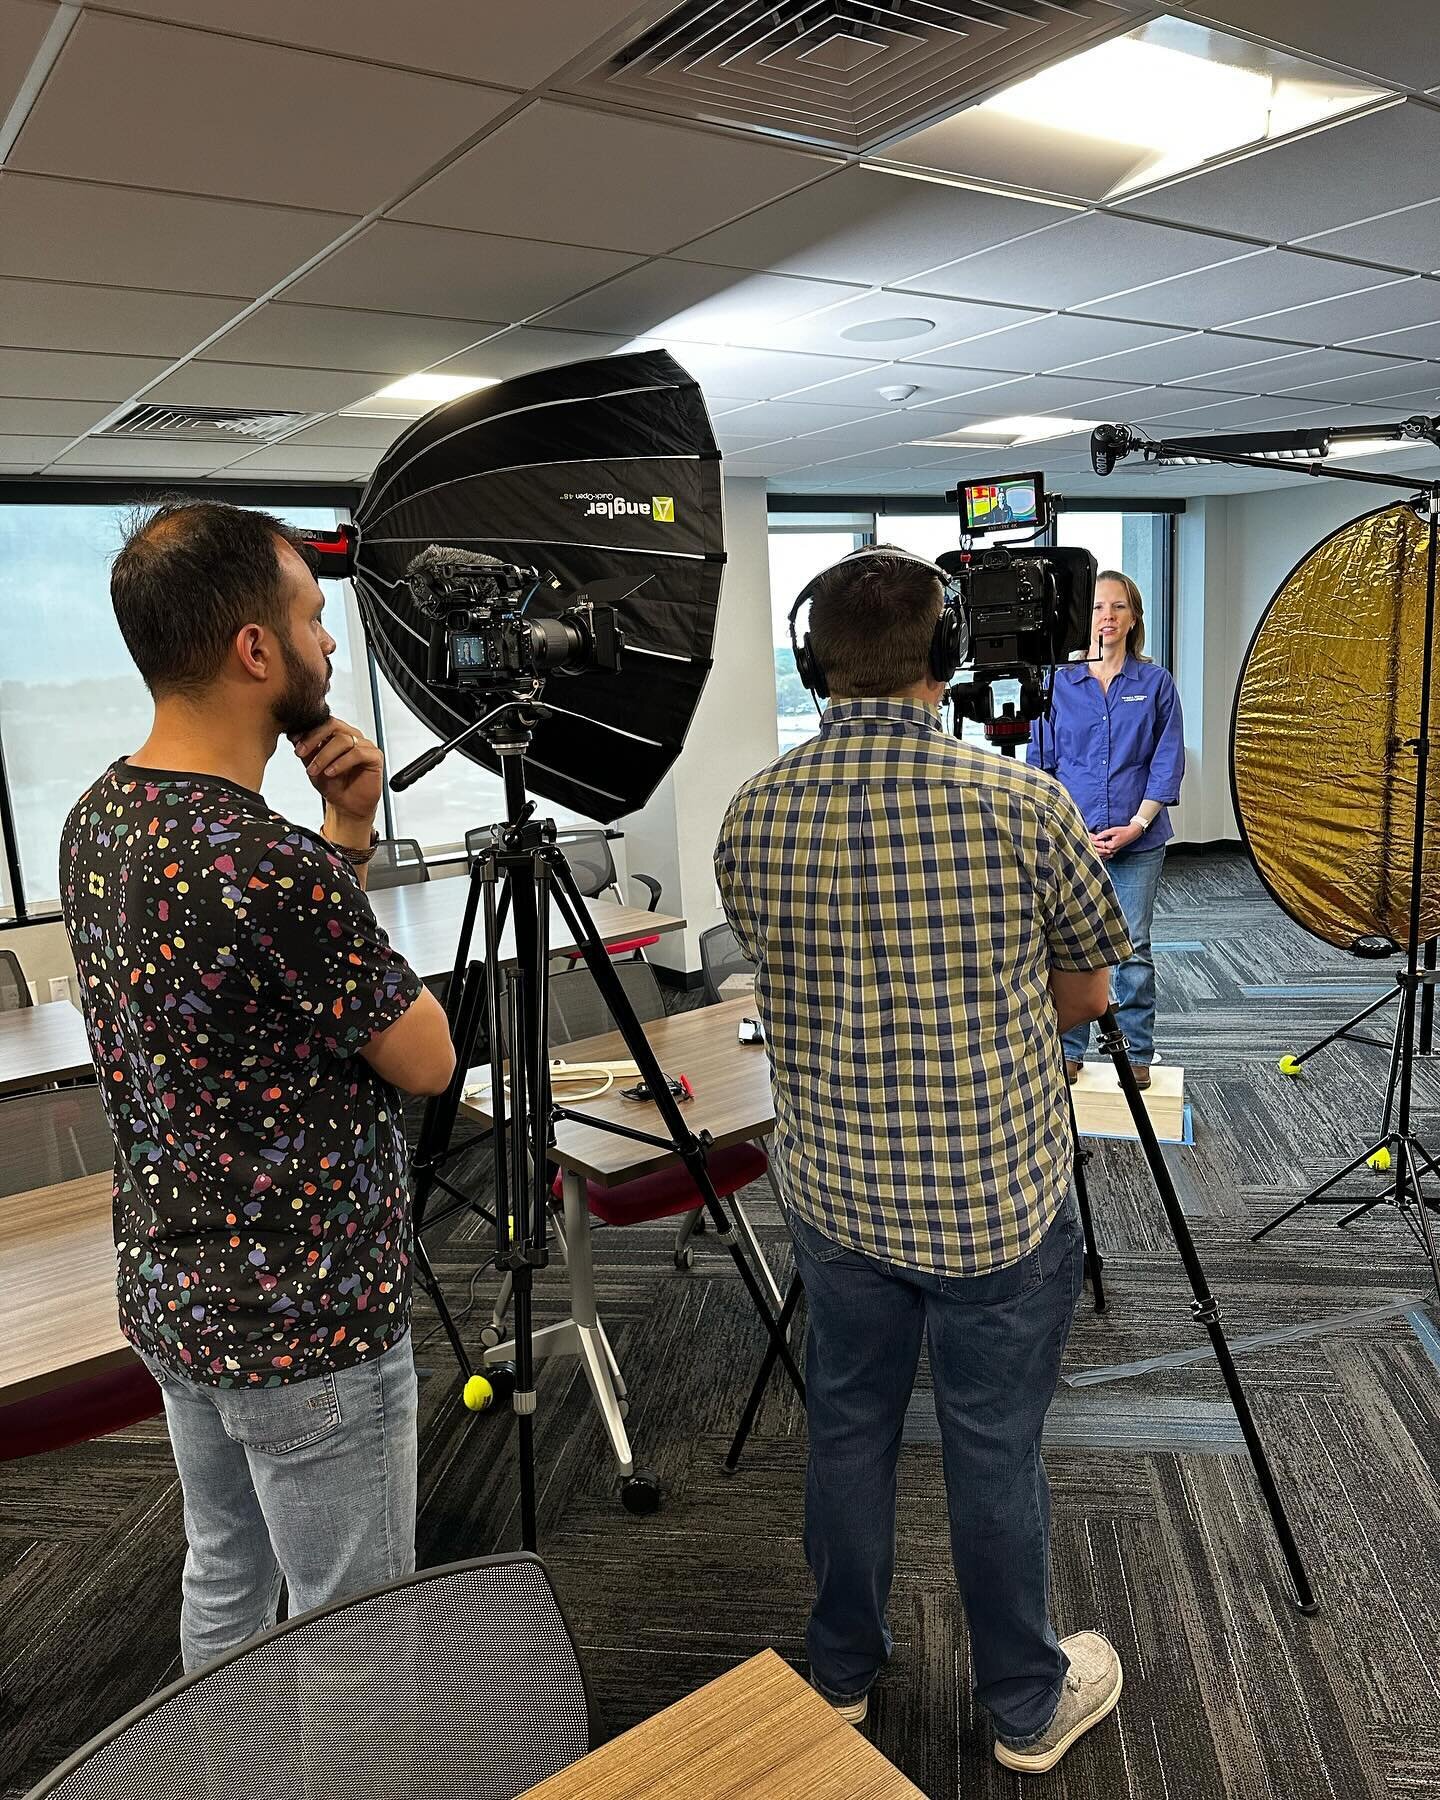 Today, Seedhouse Creative is on location capturing an introduction to each department for a &ldquo;New Employee Welcome&rdquo; video for a client. Video is rolling and teleprompter is scrolling! #SeedhouseCreative #BehindTheScenes #WacoBusiness #Waco